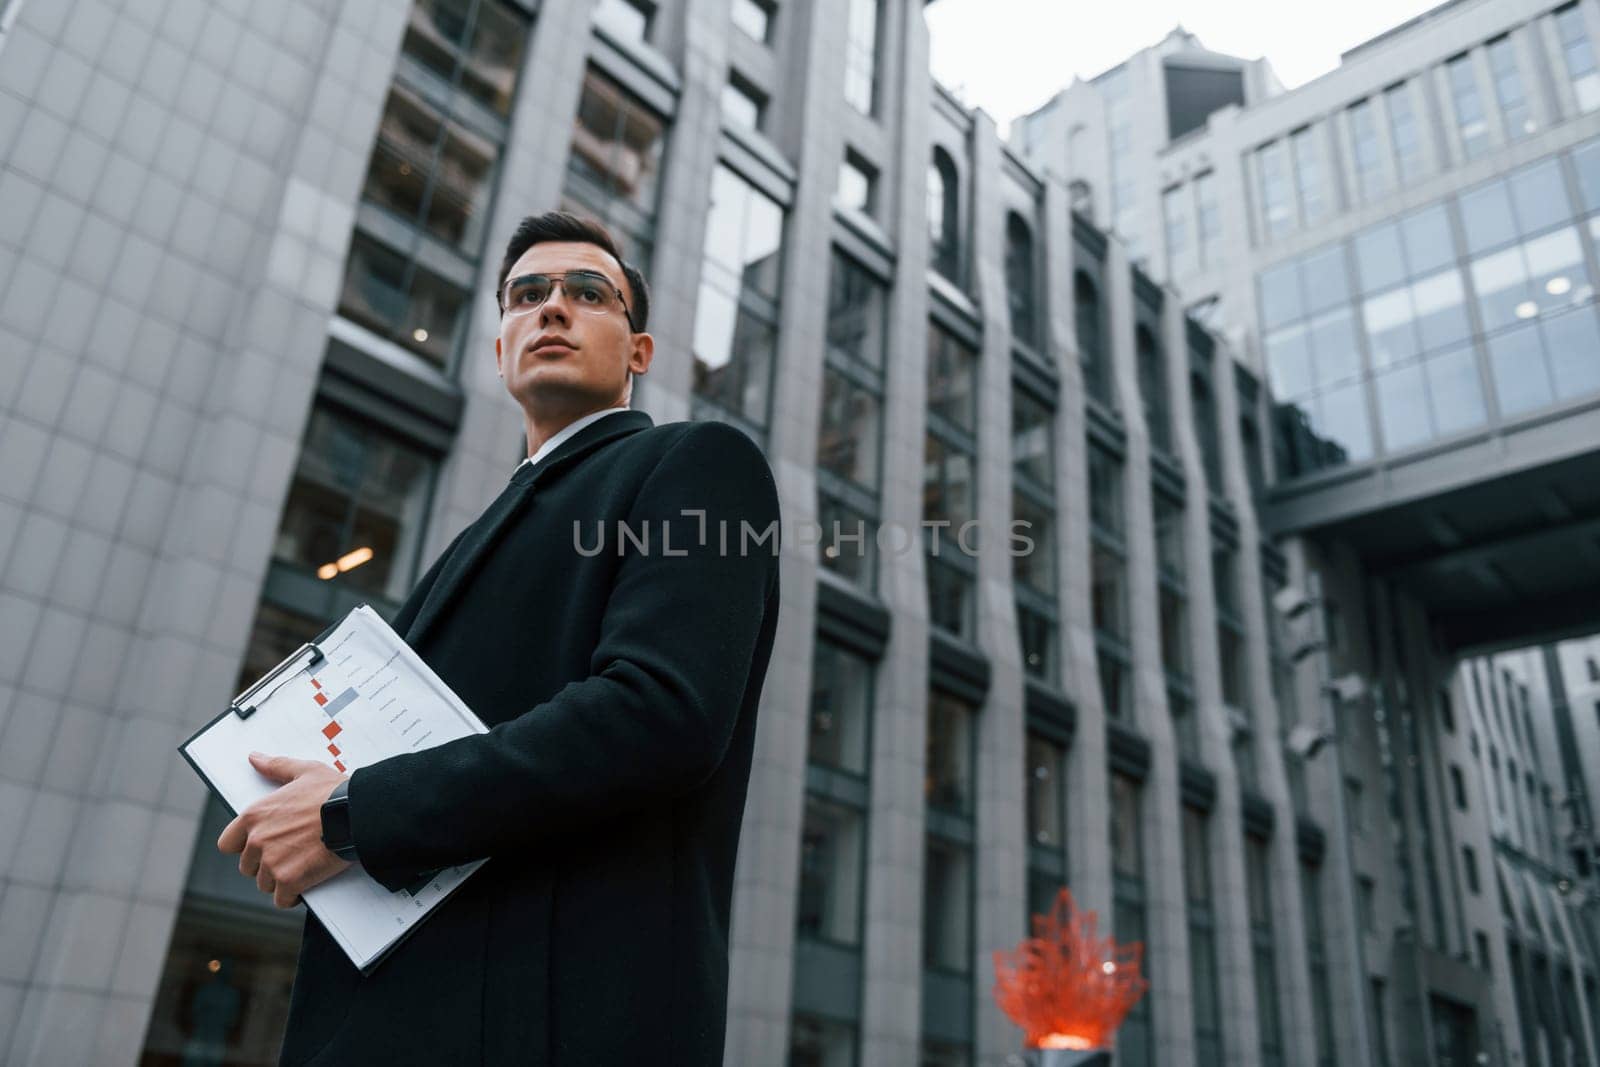 With notepad in hands. Businessman in black suit and tie is outdoors in the city.